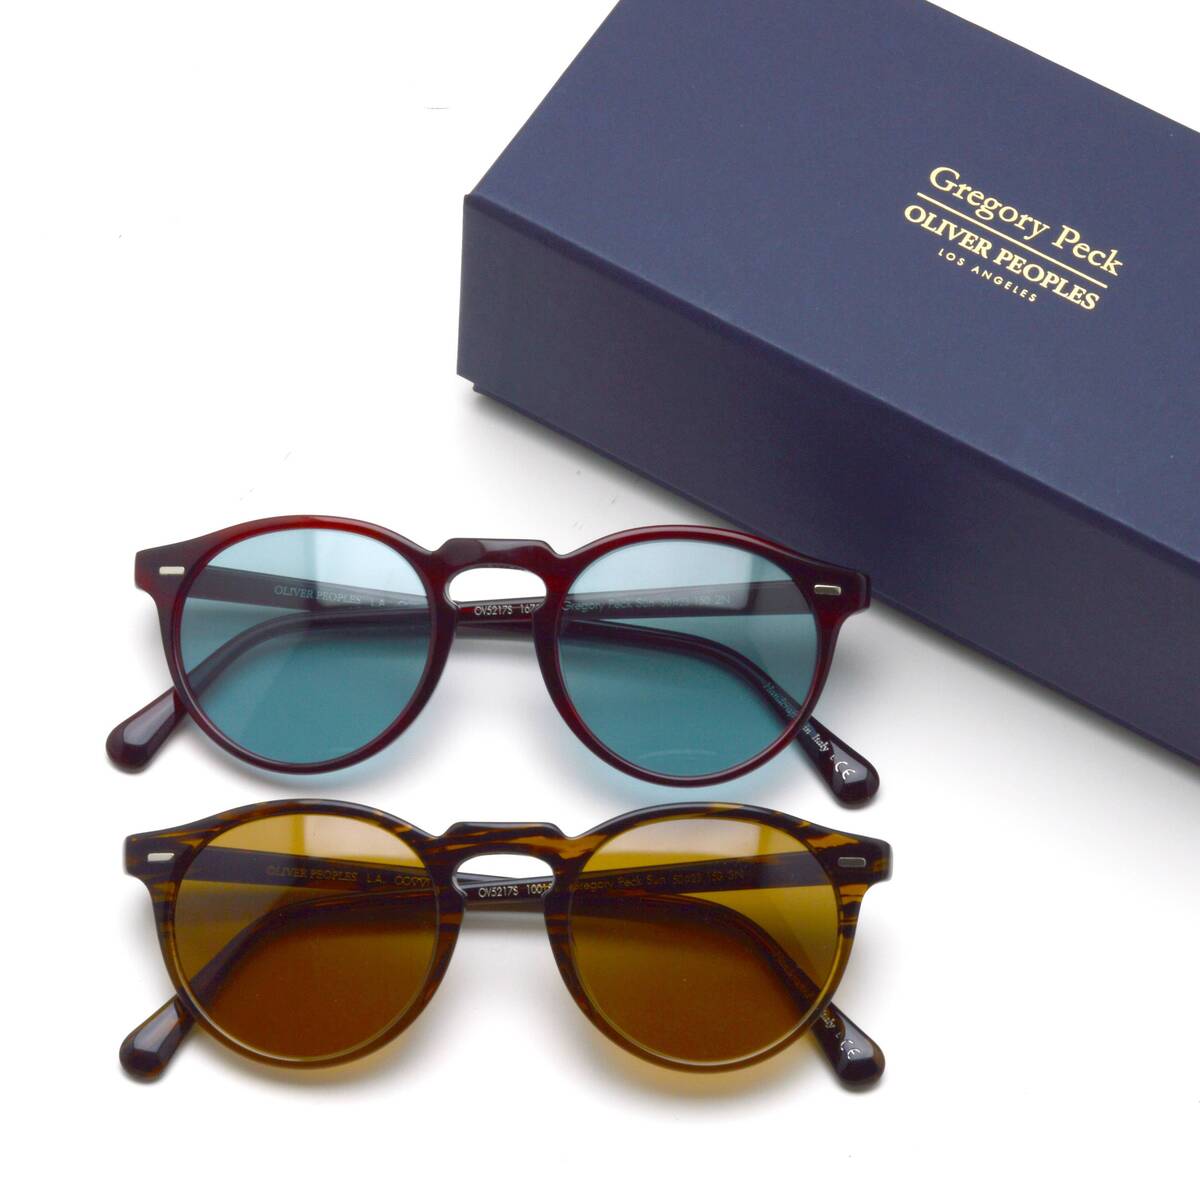 OLIVER PEOPLES　Gregory Peck Sun　サングラス